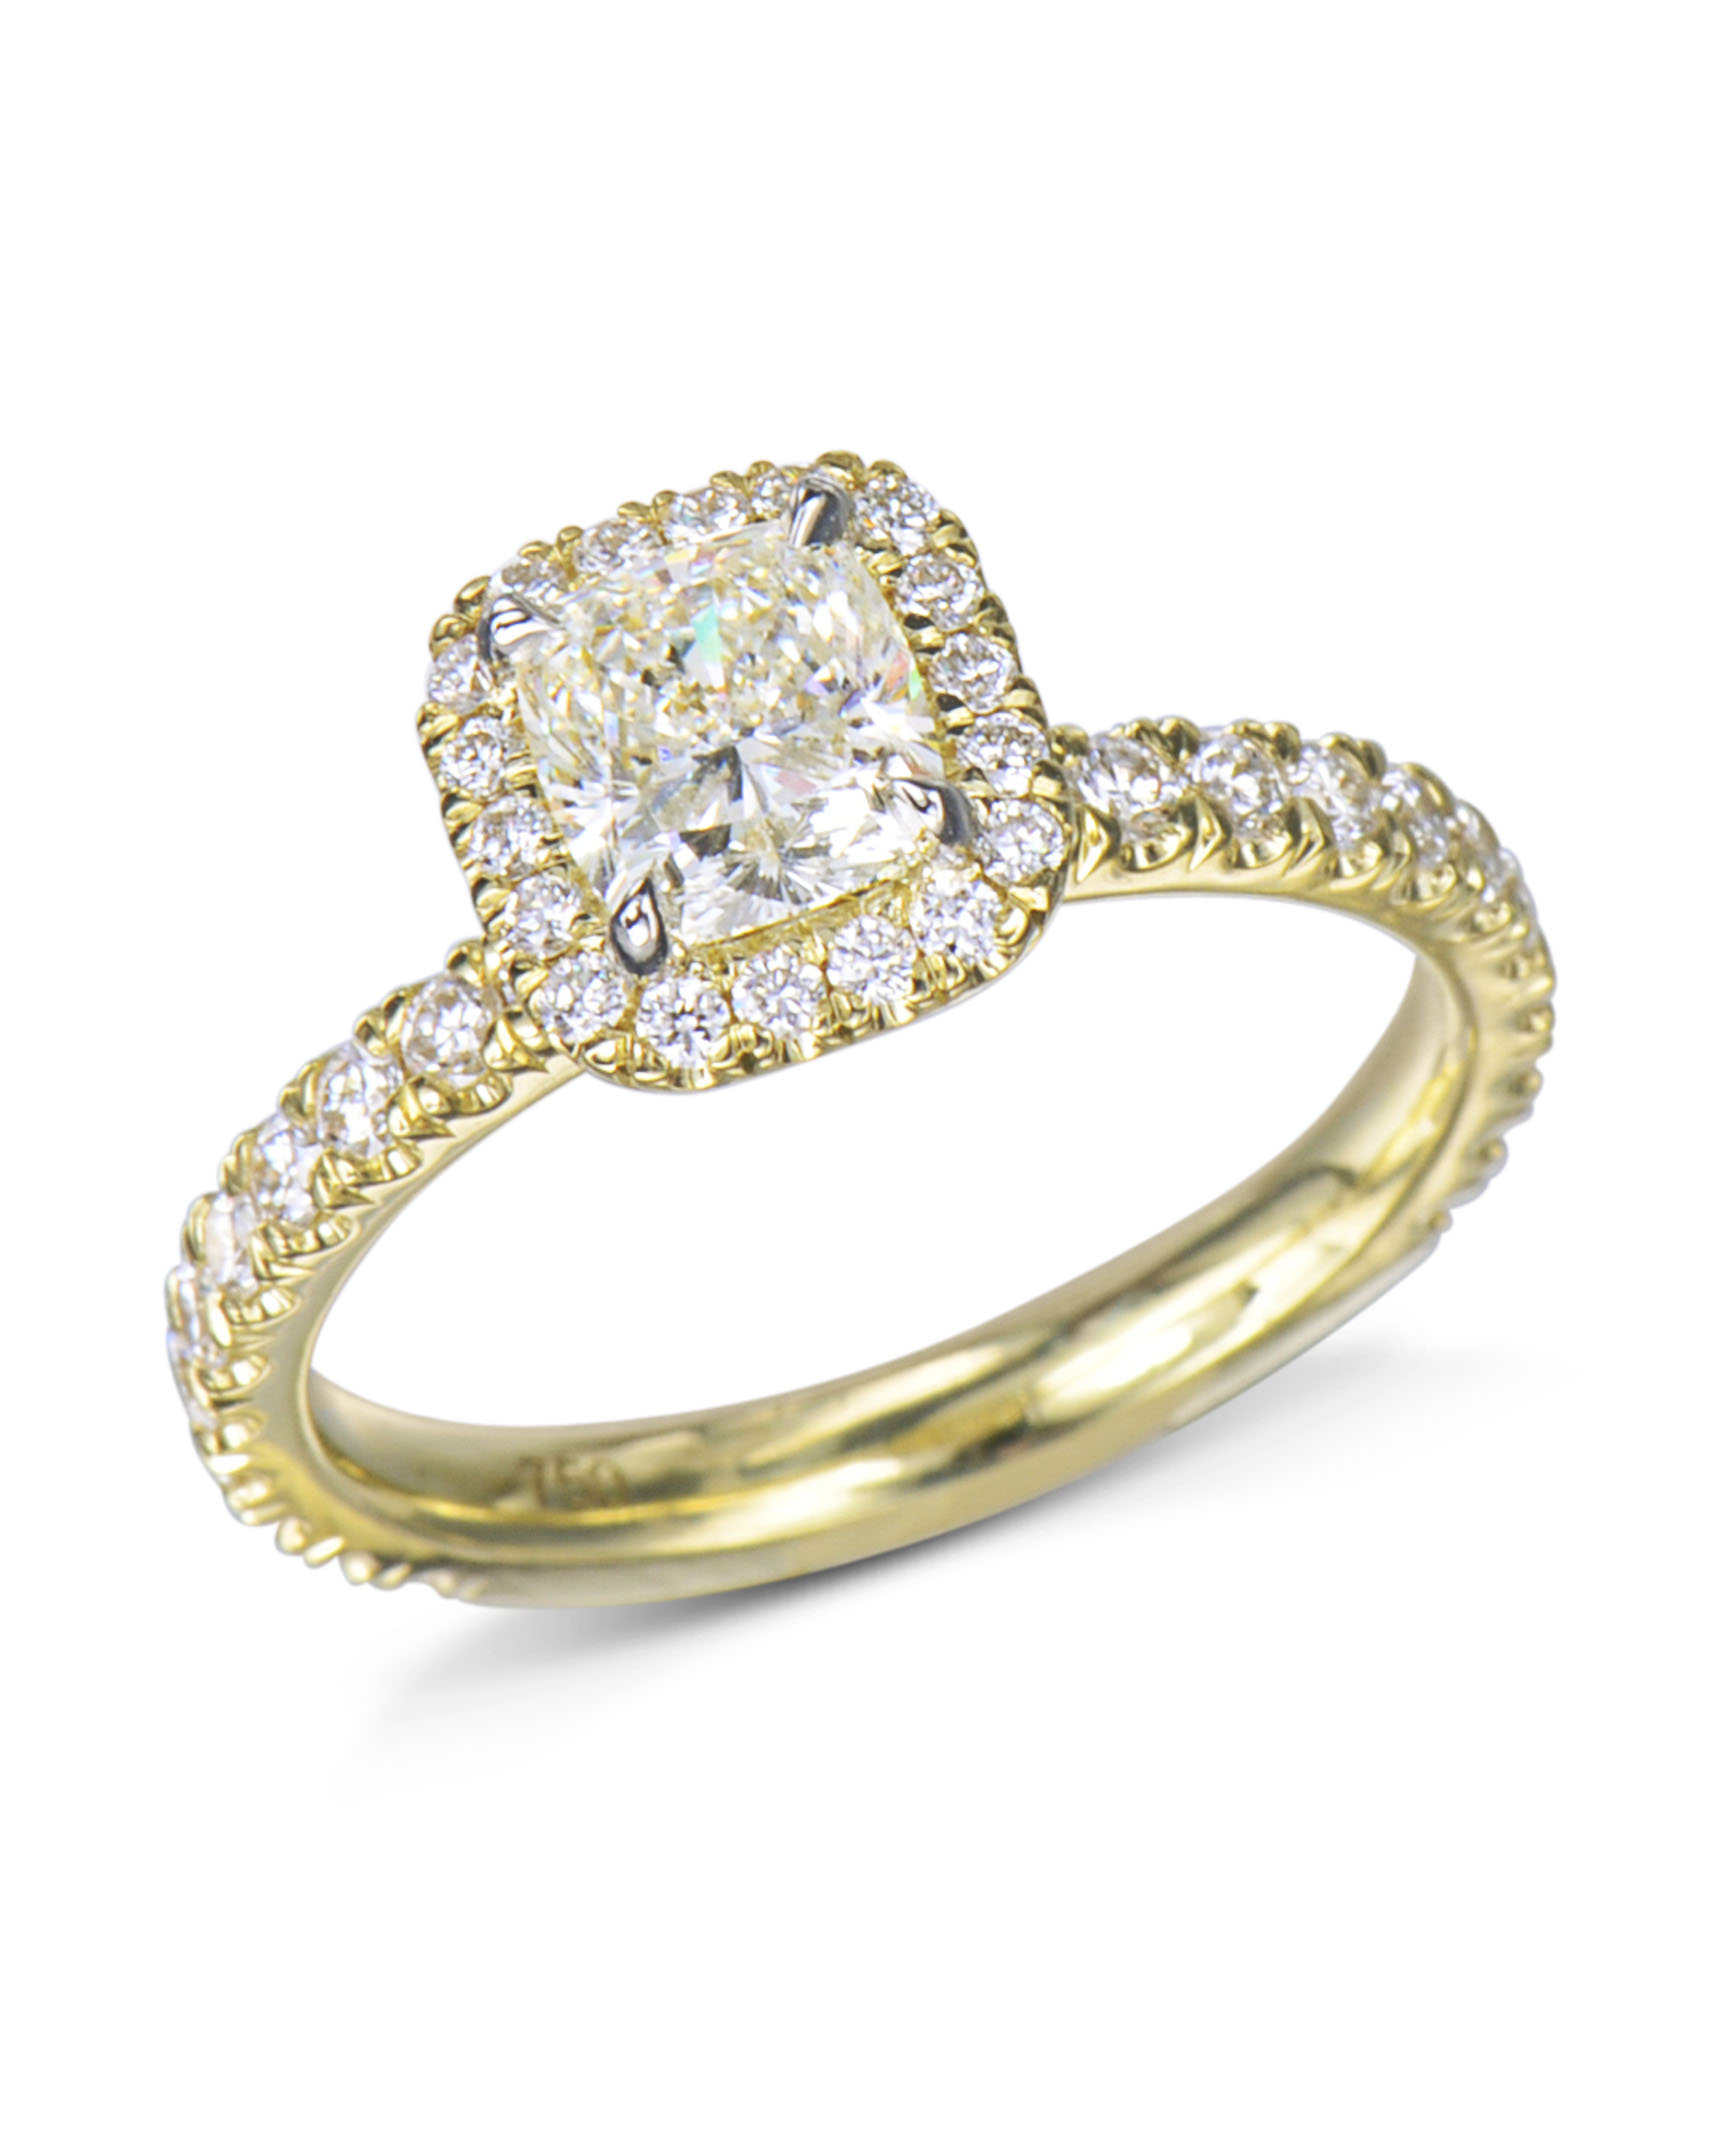 simple 0.5 carat solitaire engagement rings yellow gold